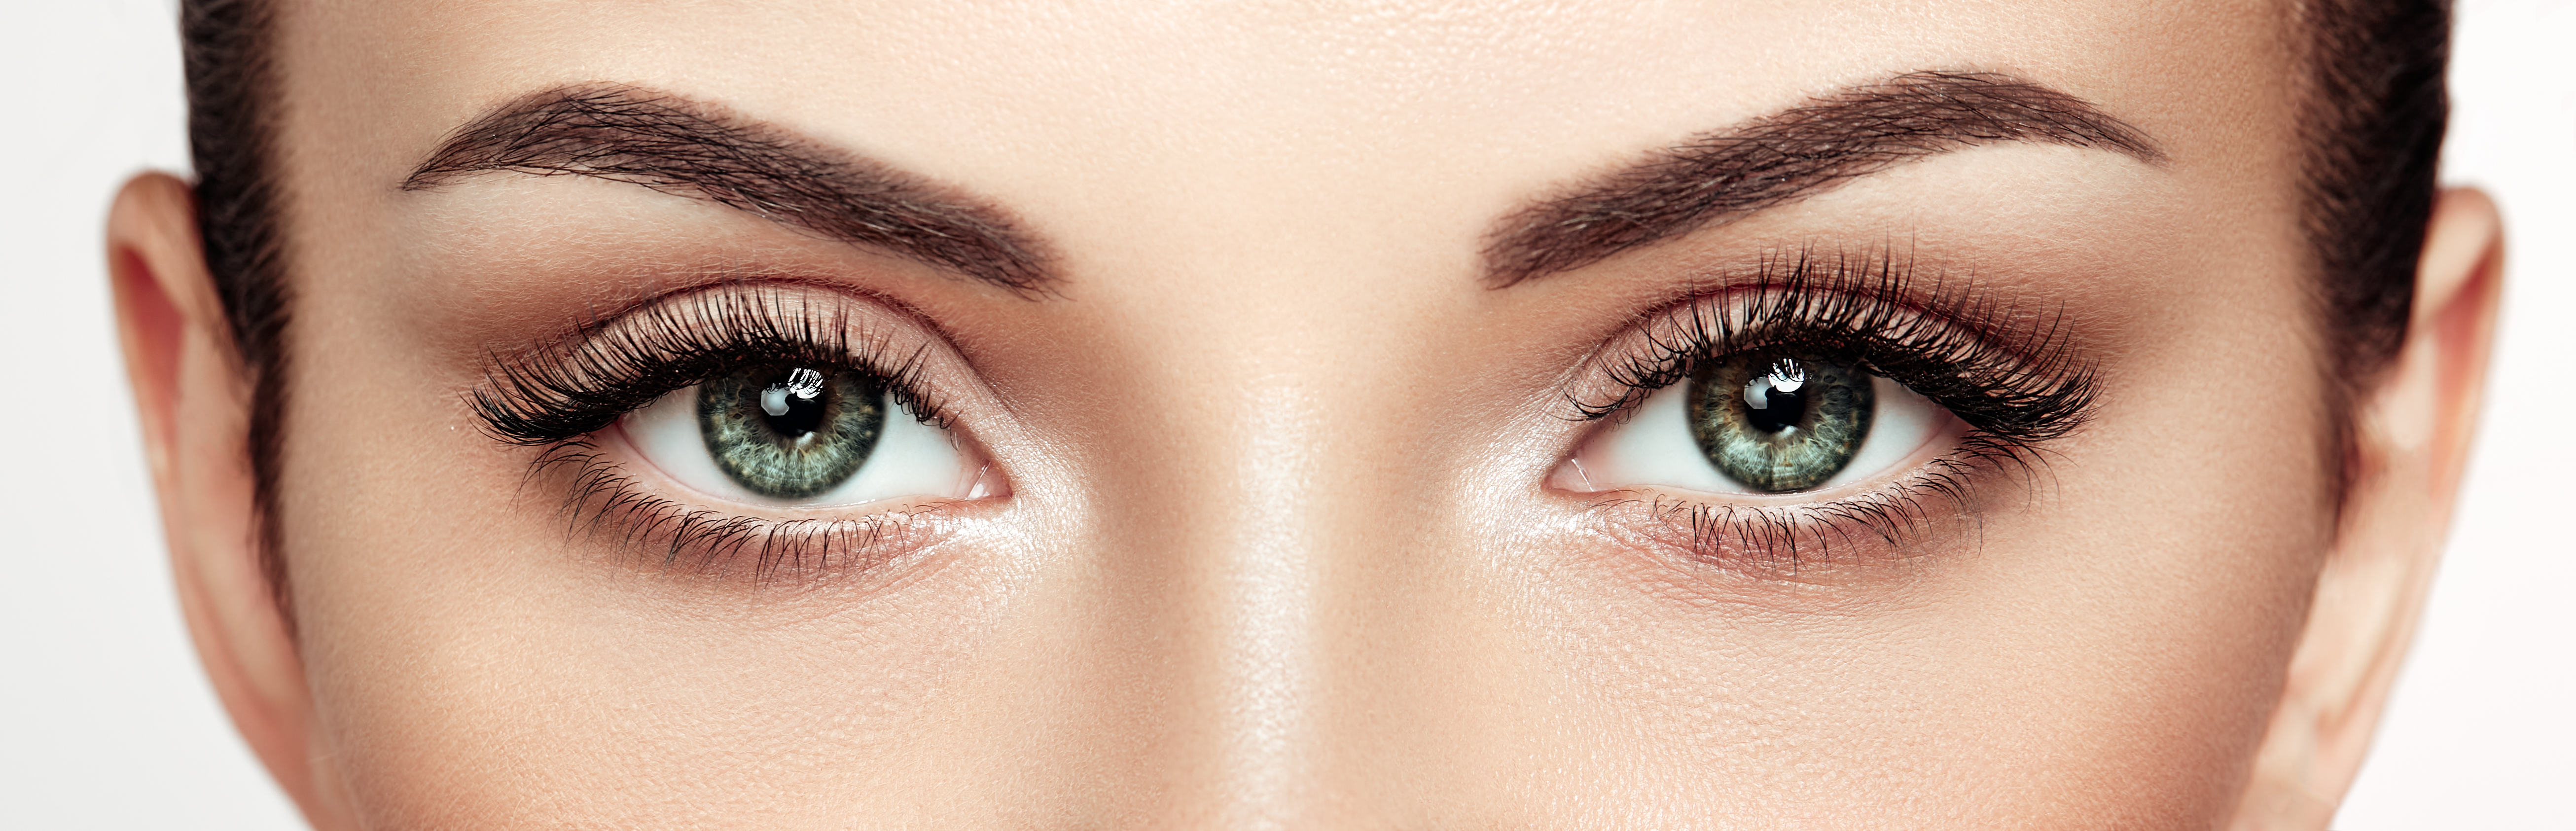 Close up of beautiful woman’s eyes showing smooth skin, elevated eyebrows, and eyelids without significant sagging.